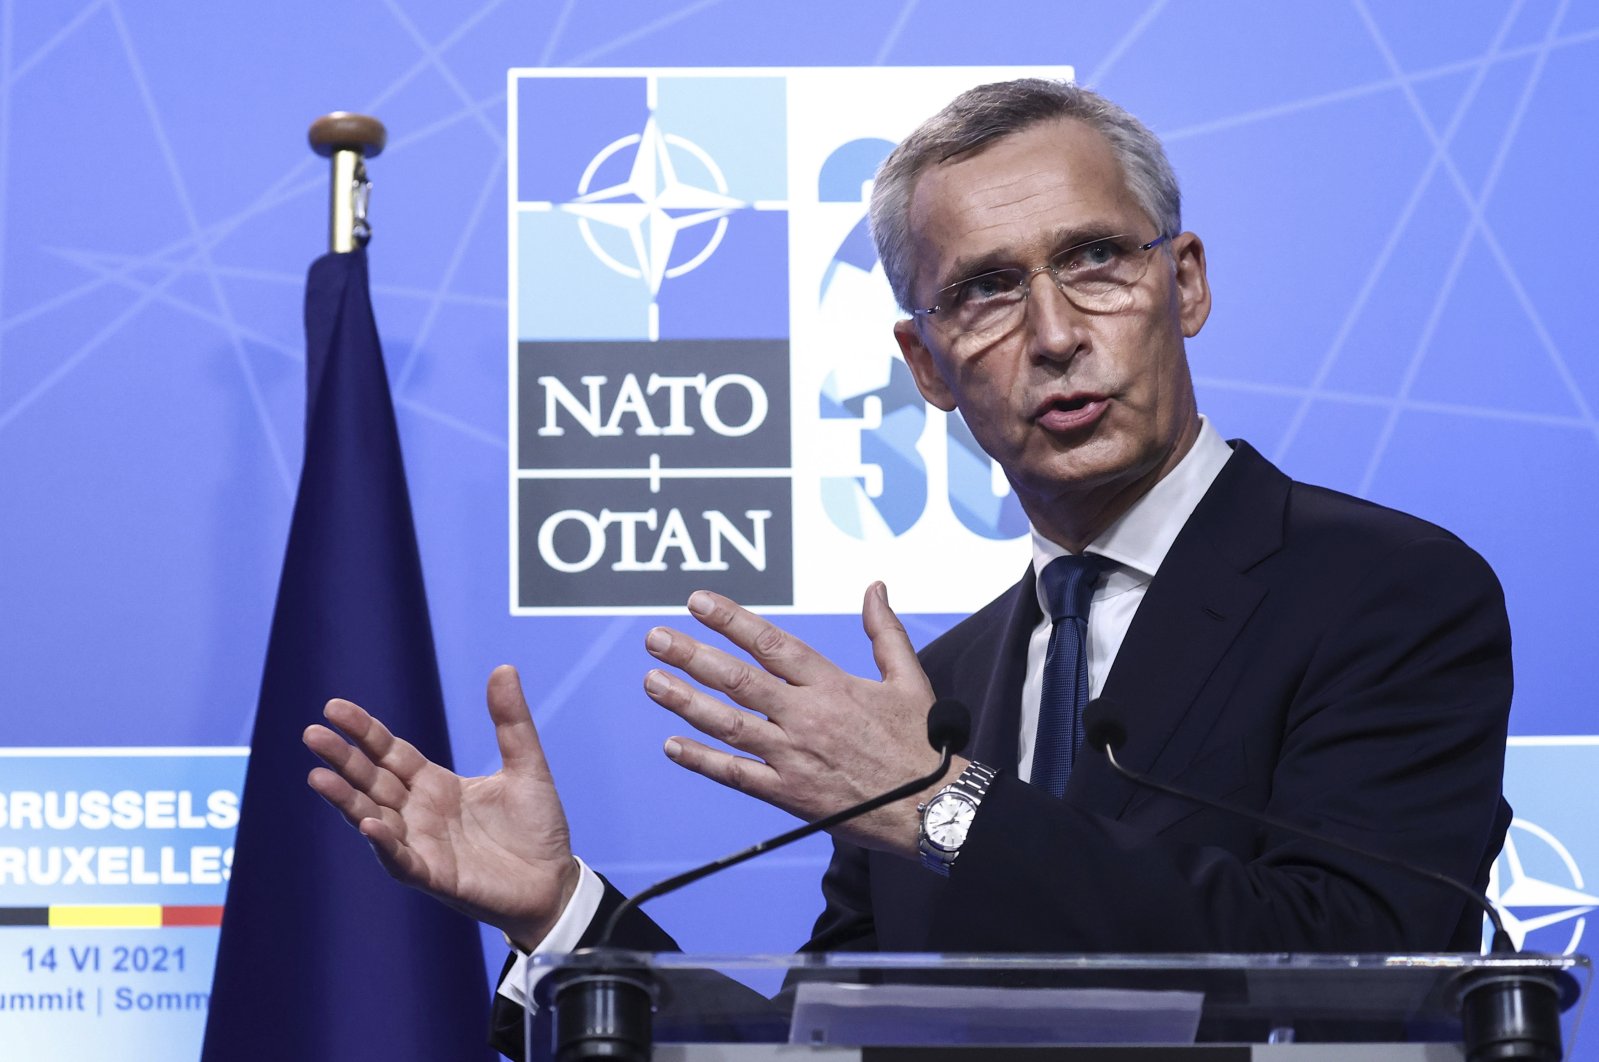 NATO Secretary-General Jens Stoltenberg speaks during a media conference at a NATO summit in Brussels, June 14, 2021. (AP Photo)